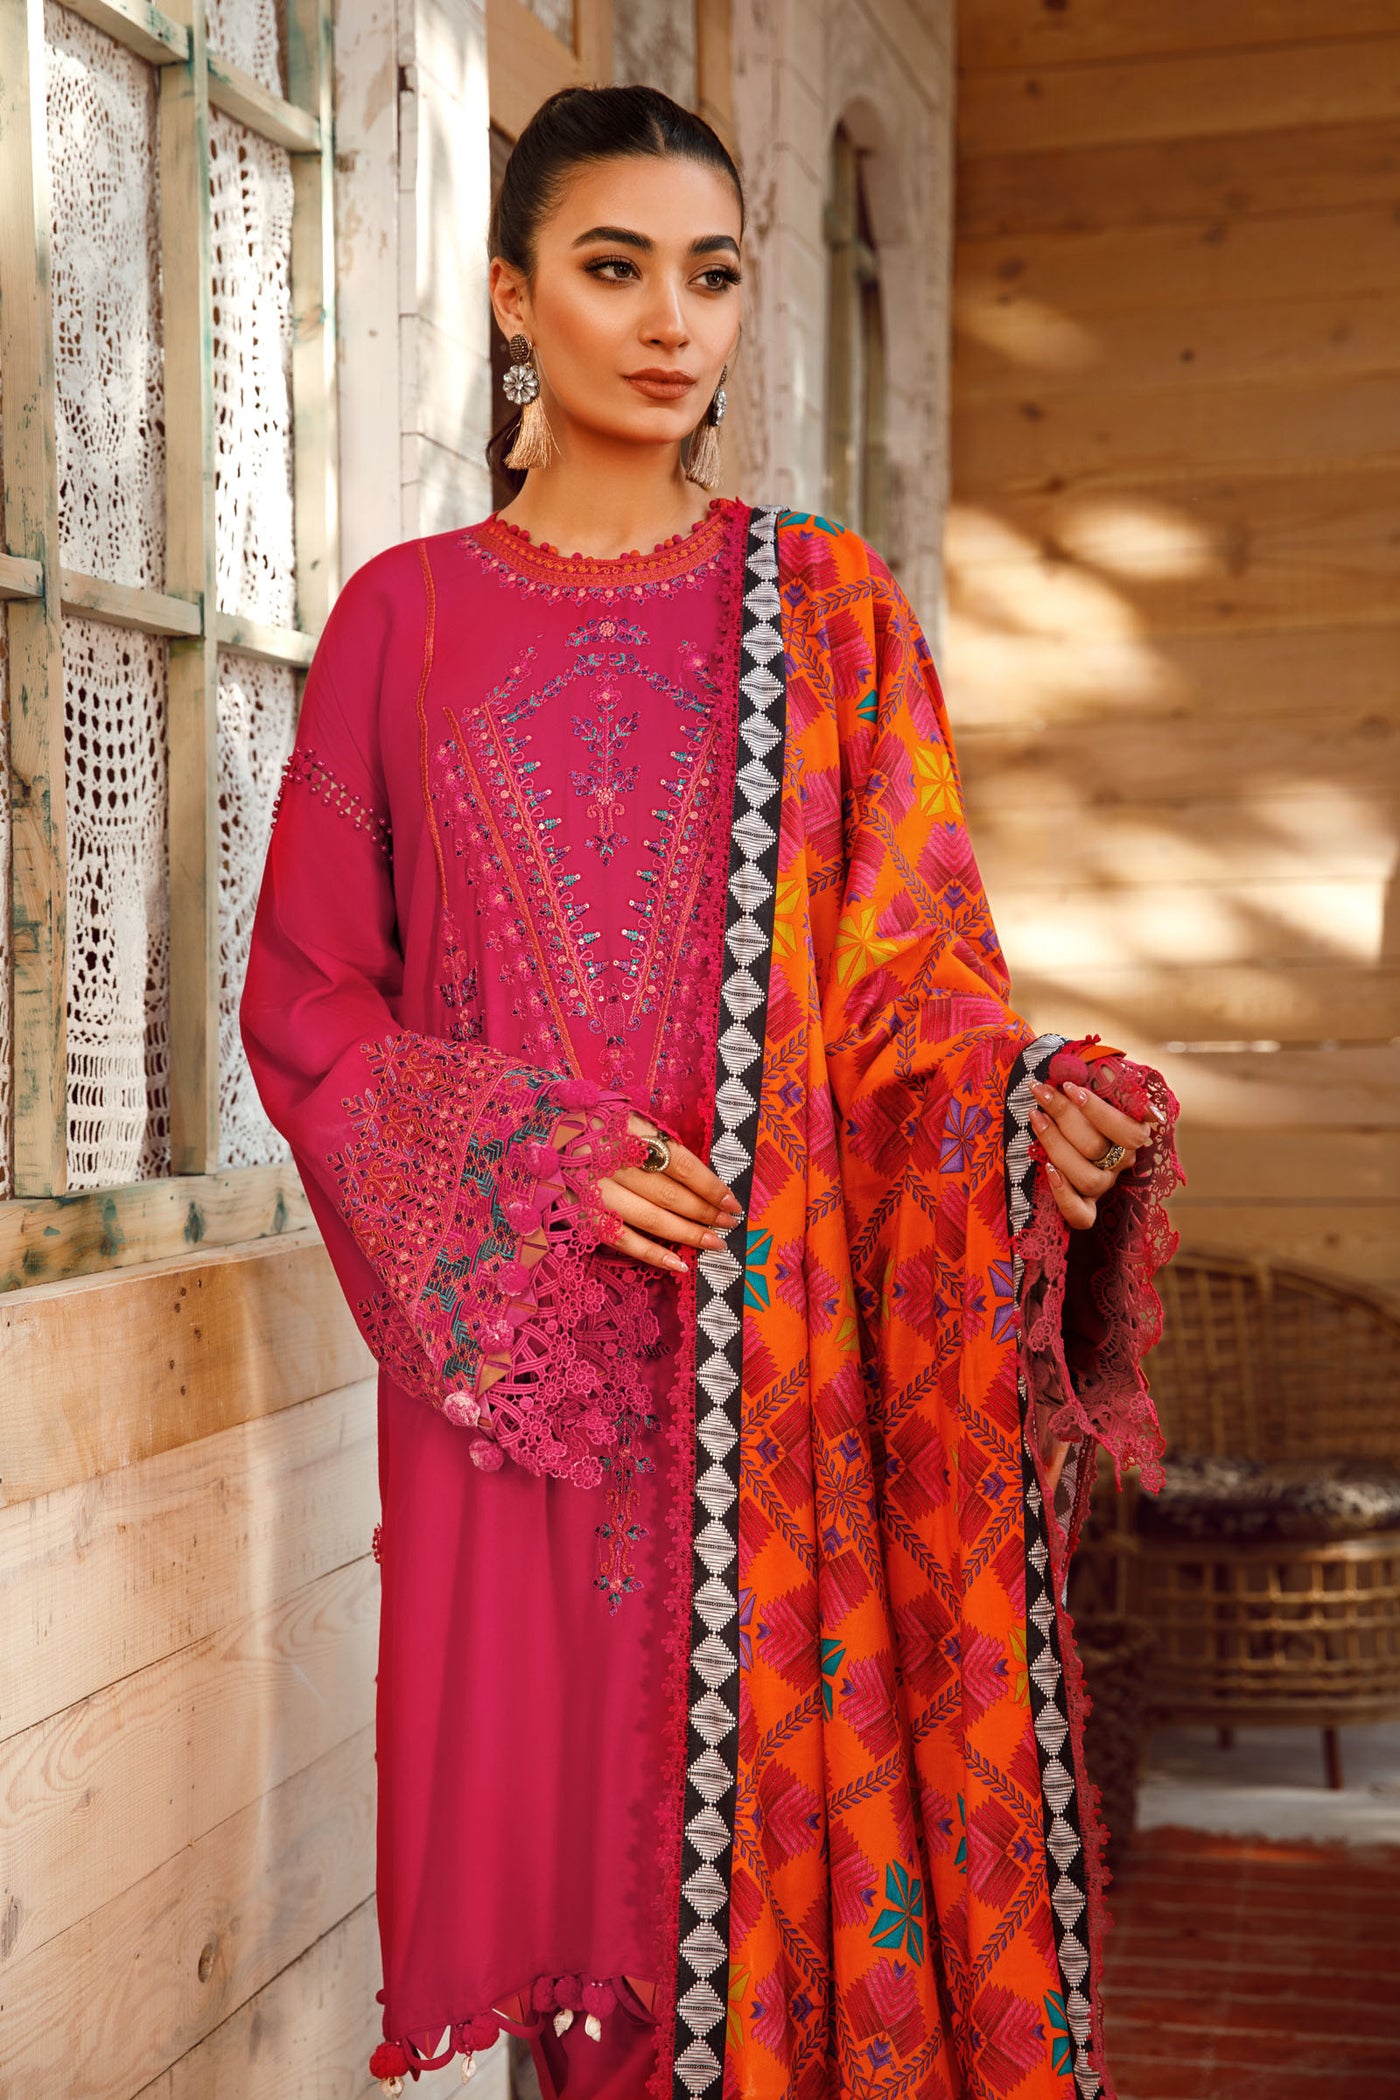 Maria. B 3 Piece Unstitched Linen Embroidered Suit - MPT-1604-A